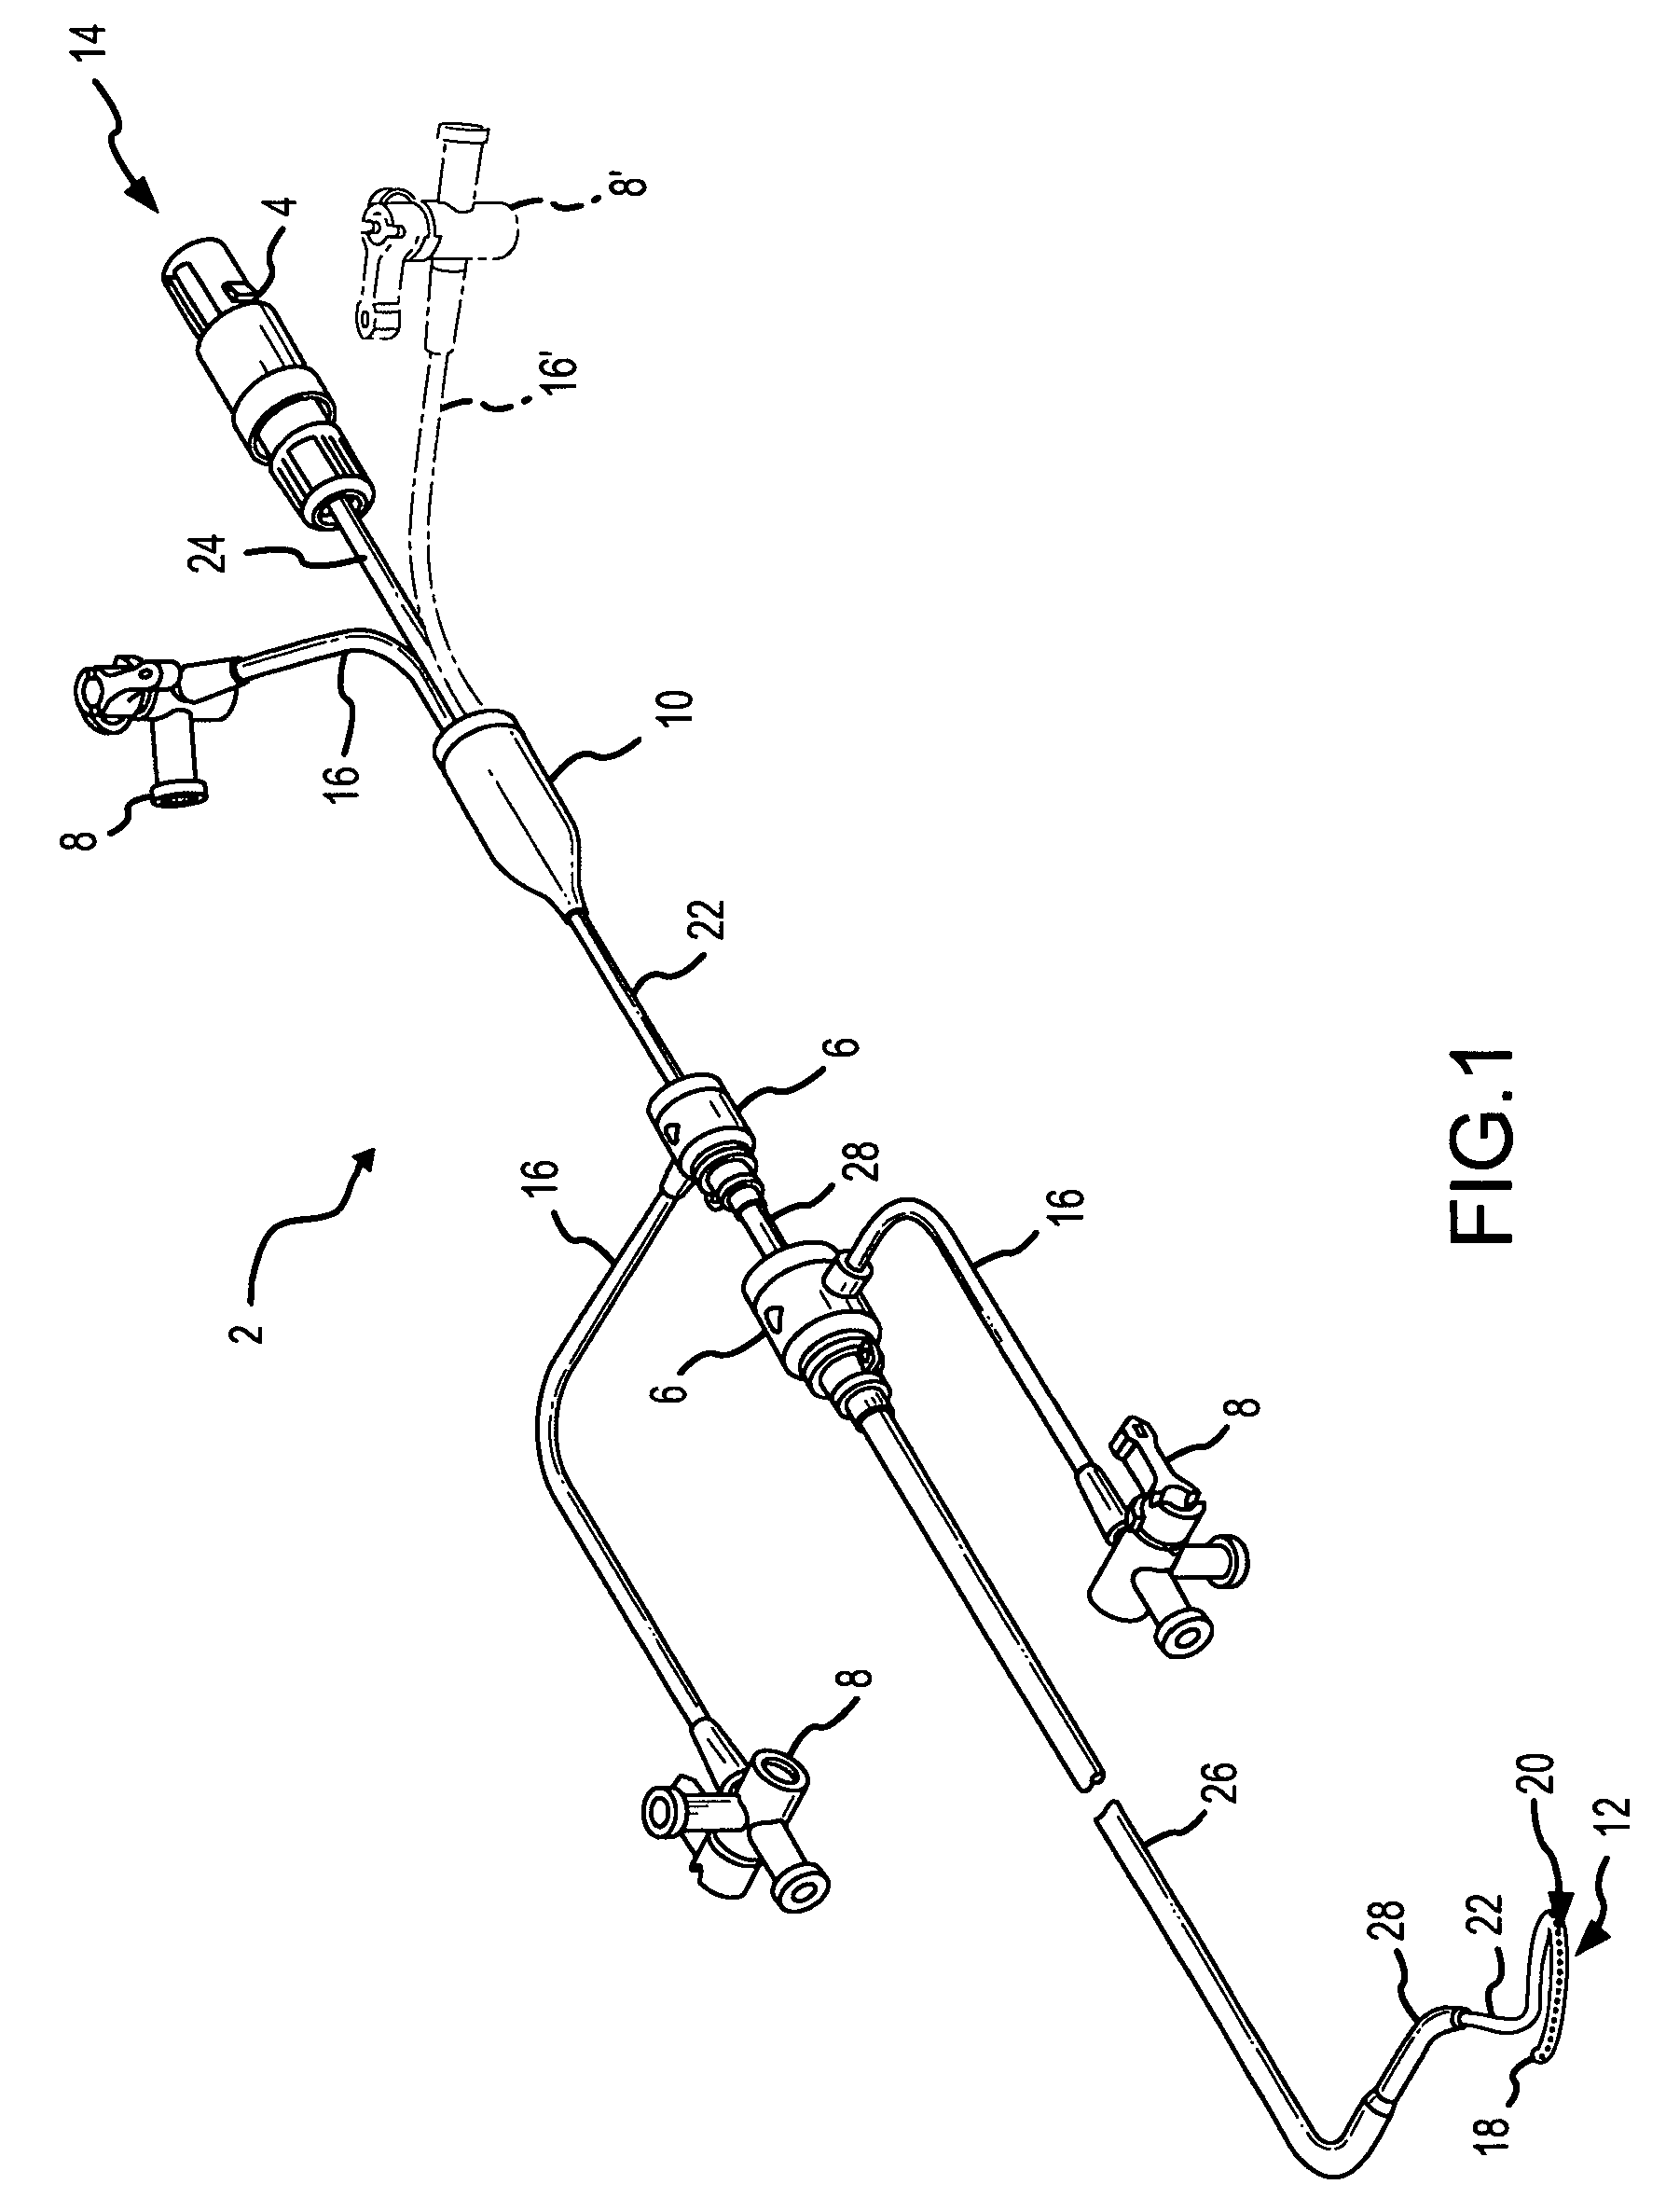 Ablation catheter with adjustable virtual electrode